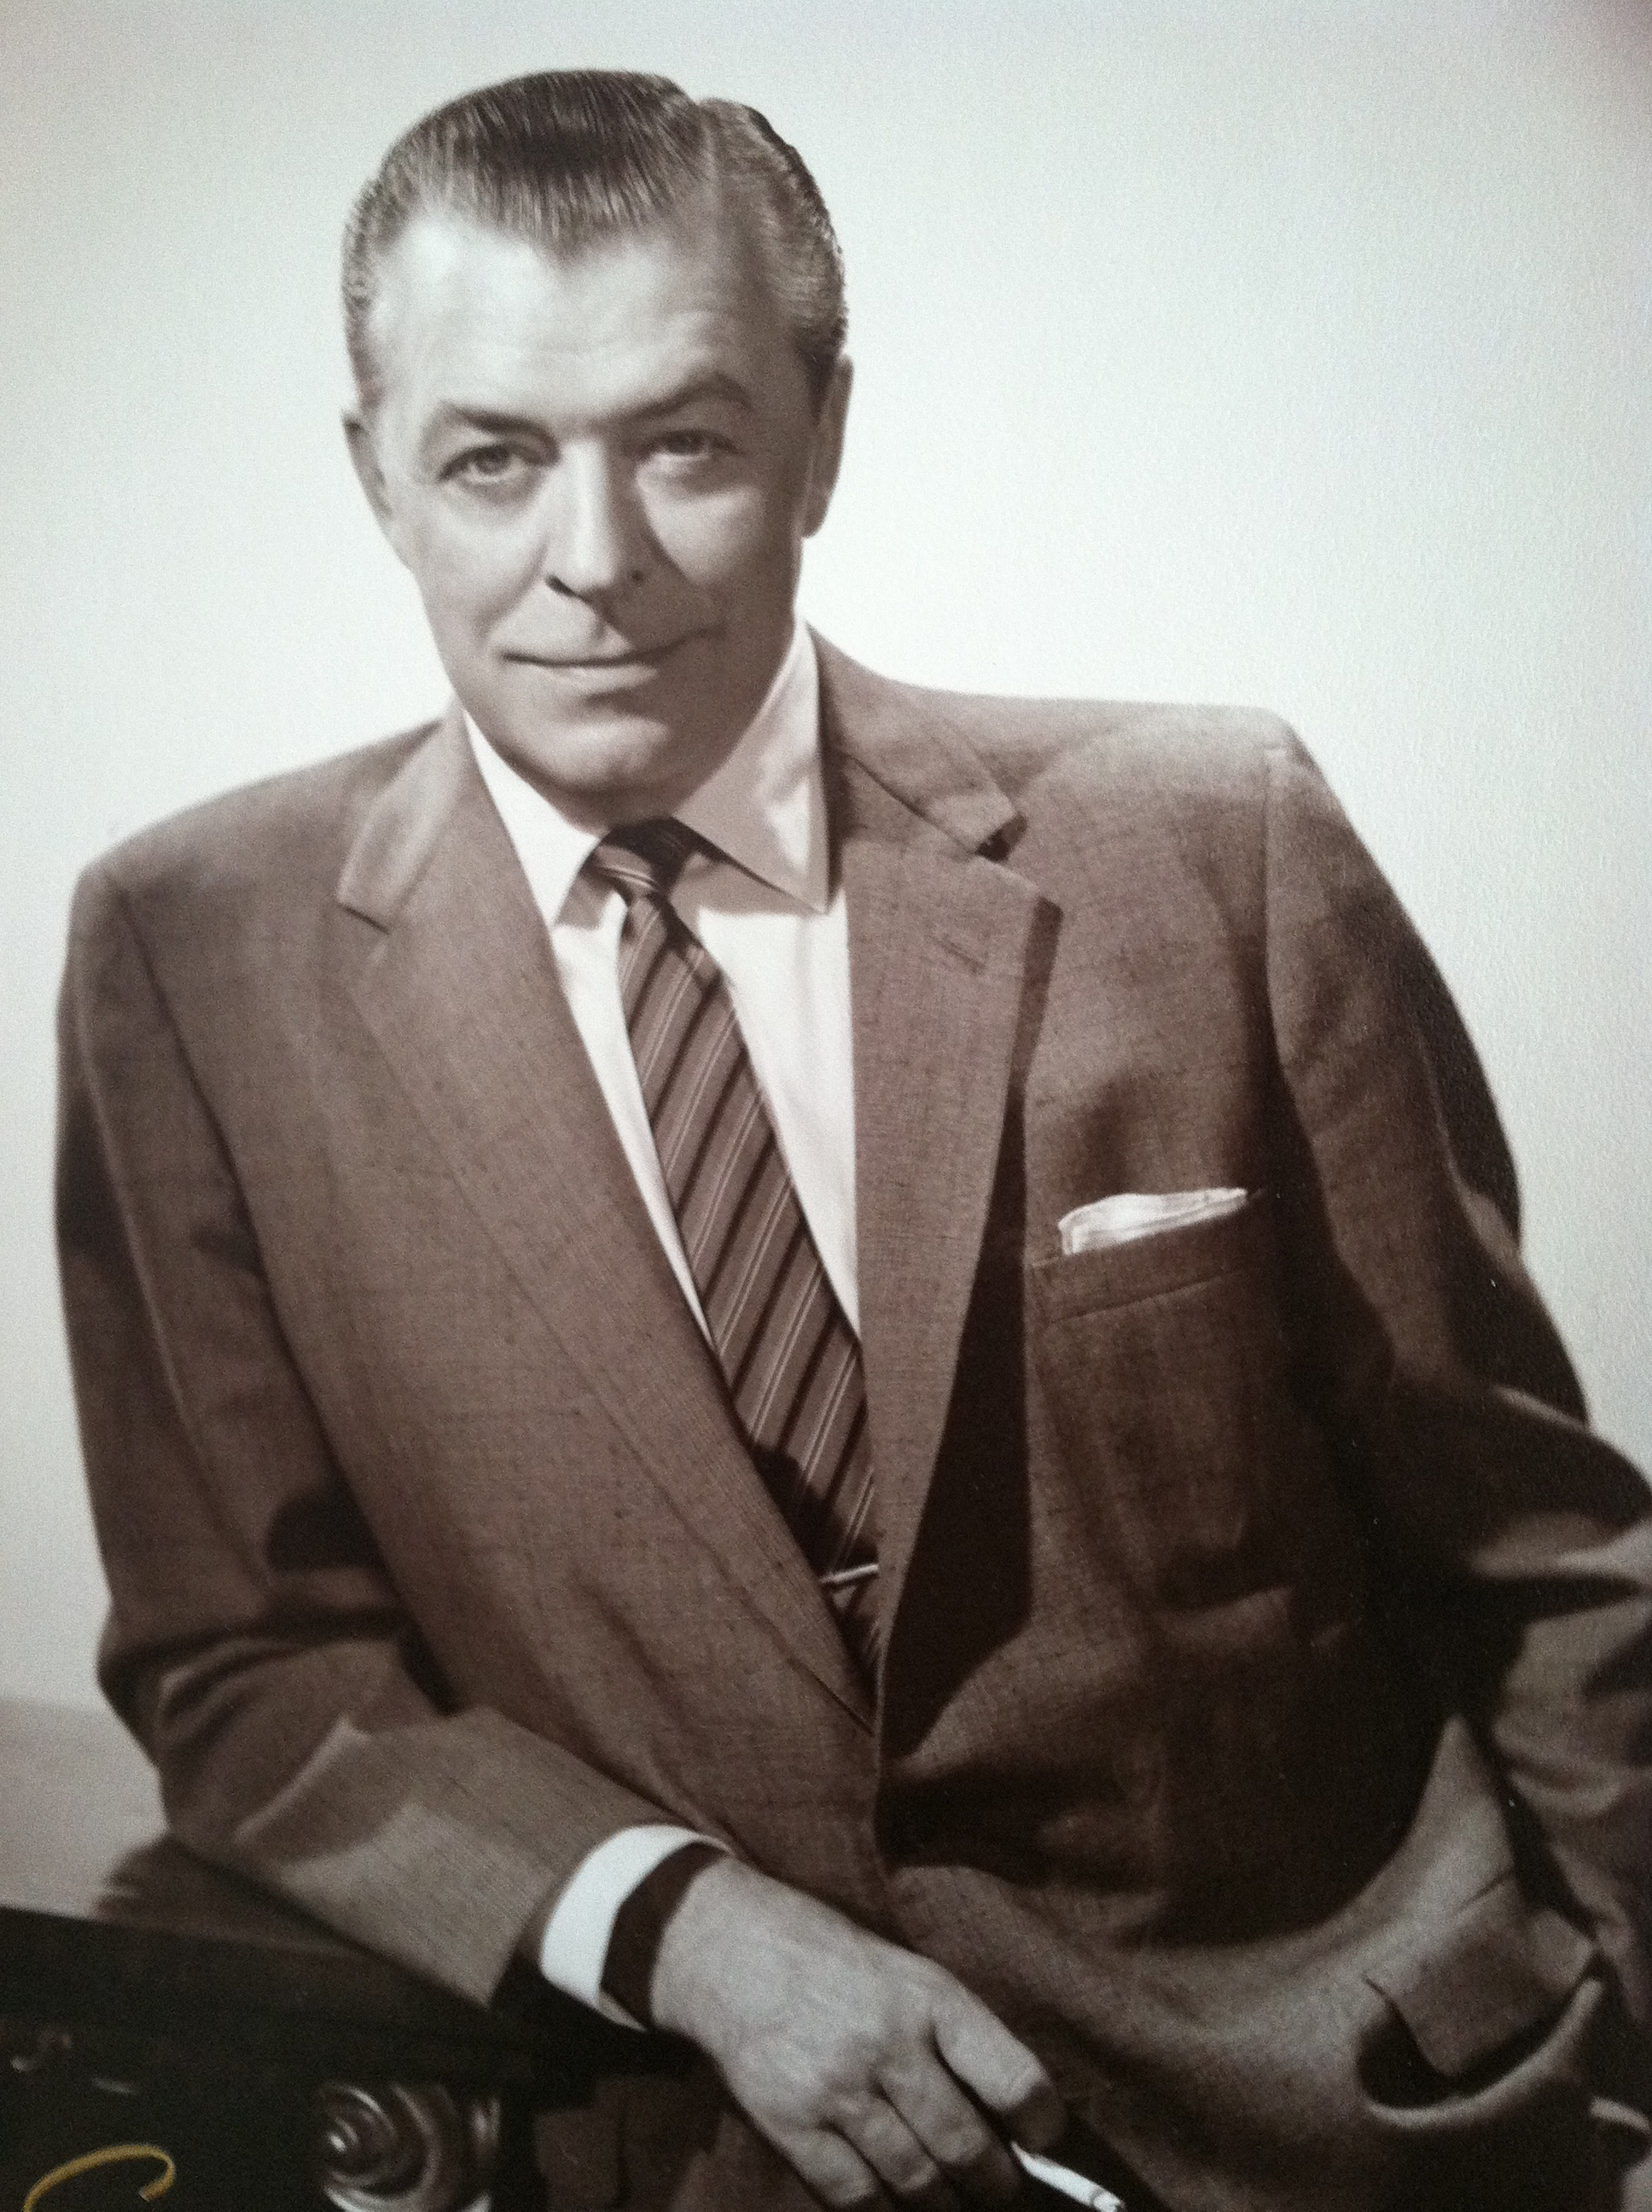 Actor Lyle Talbot in the late 1950s.